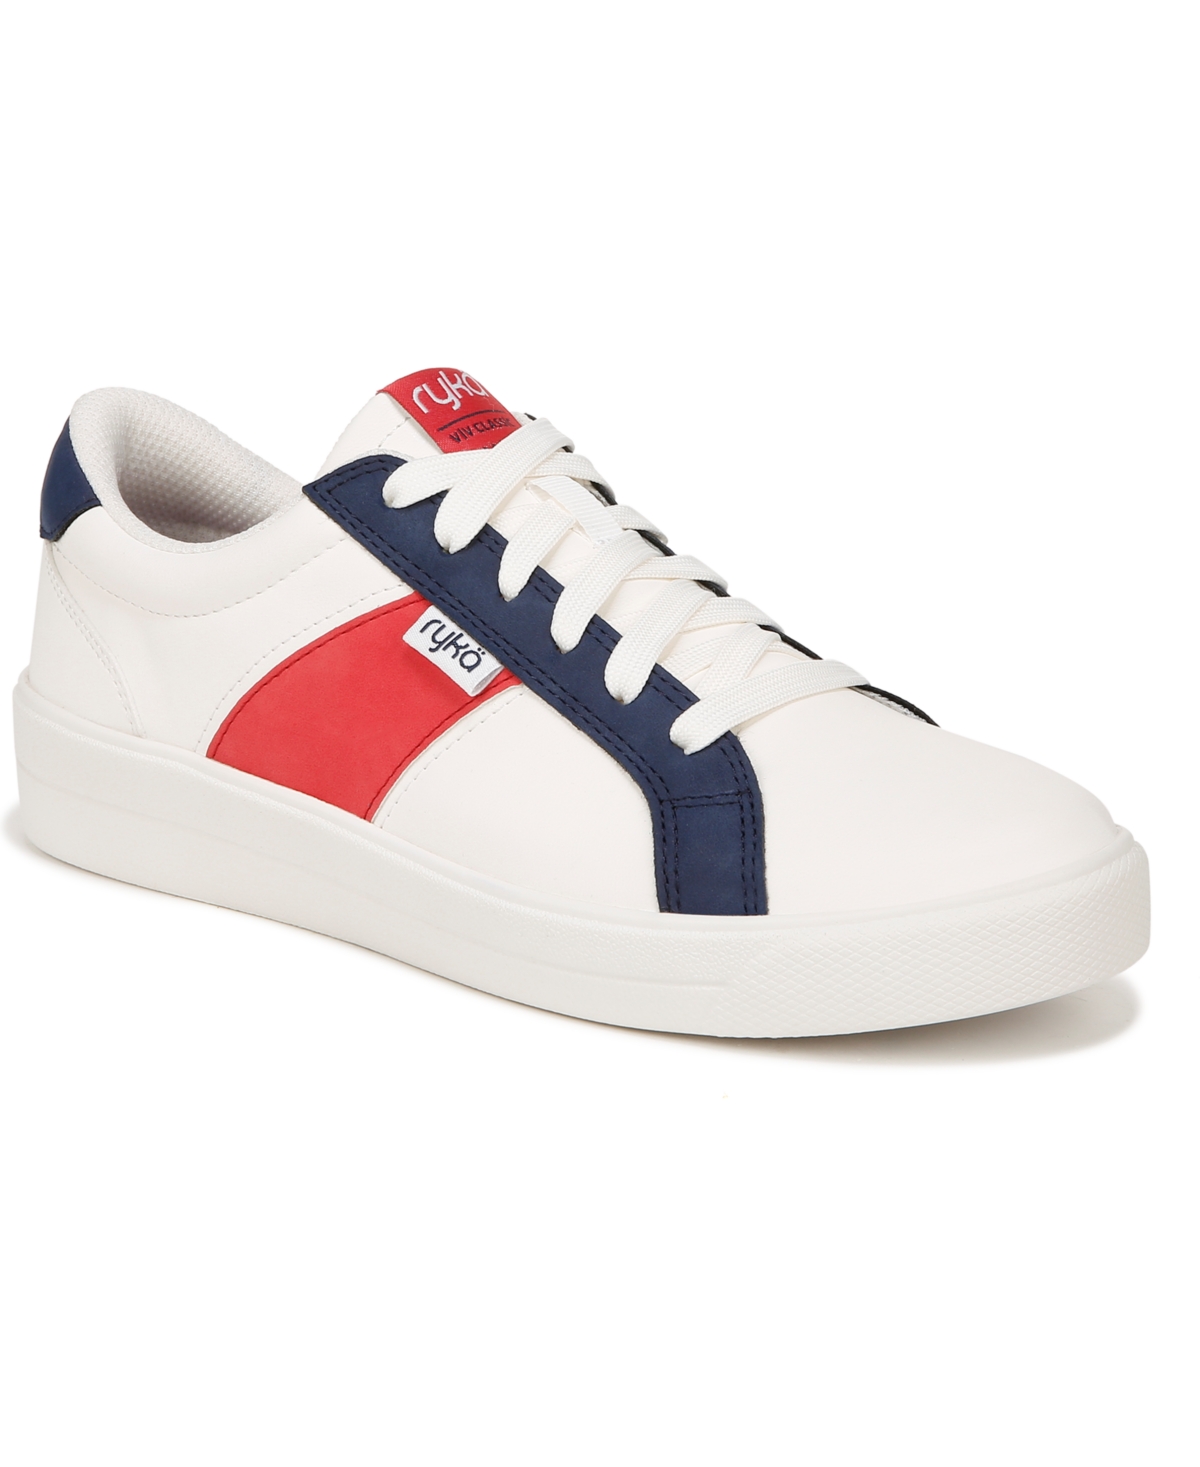 Ryka Women's Viv Classic Oxfords In Red,white,blue Faux Leather